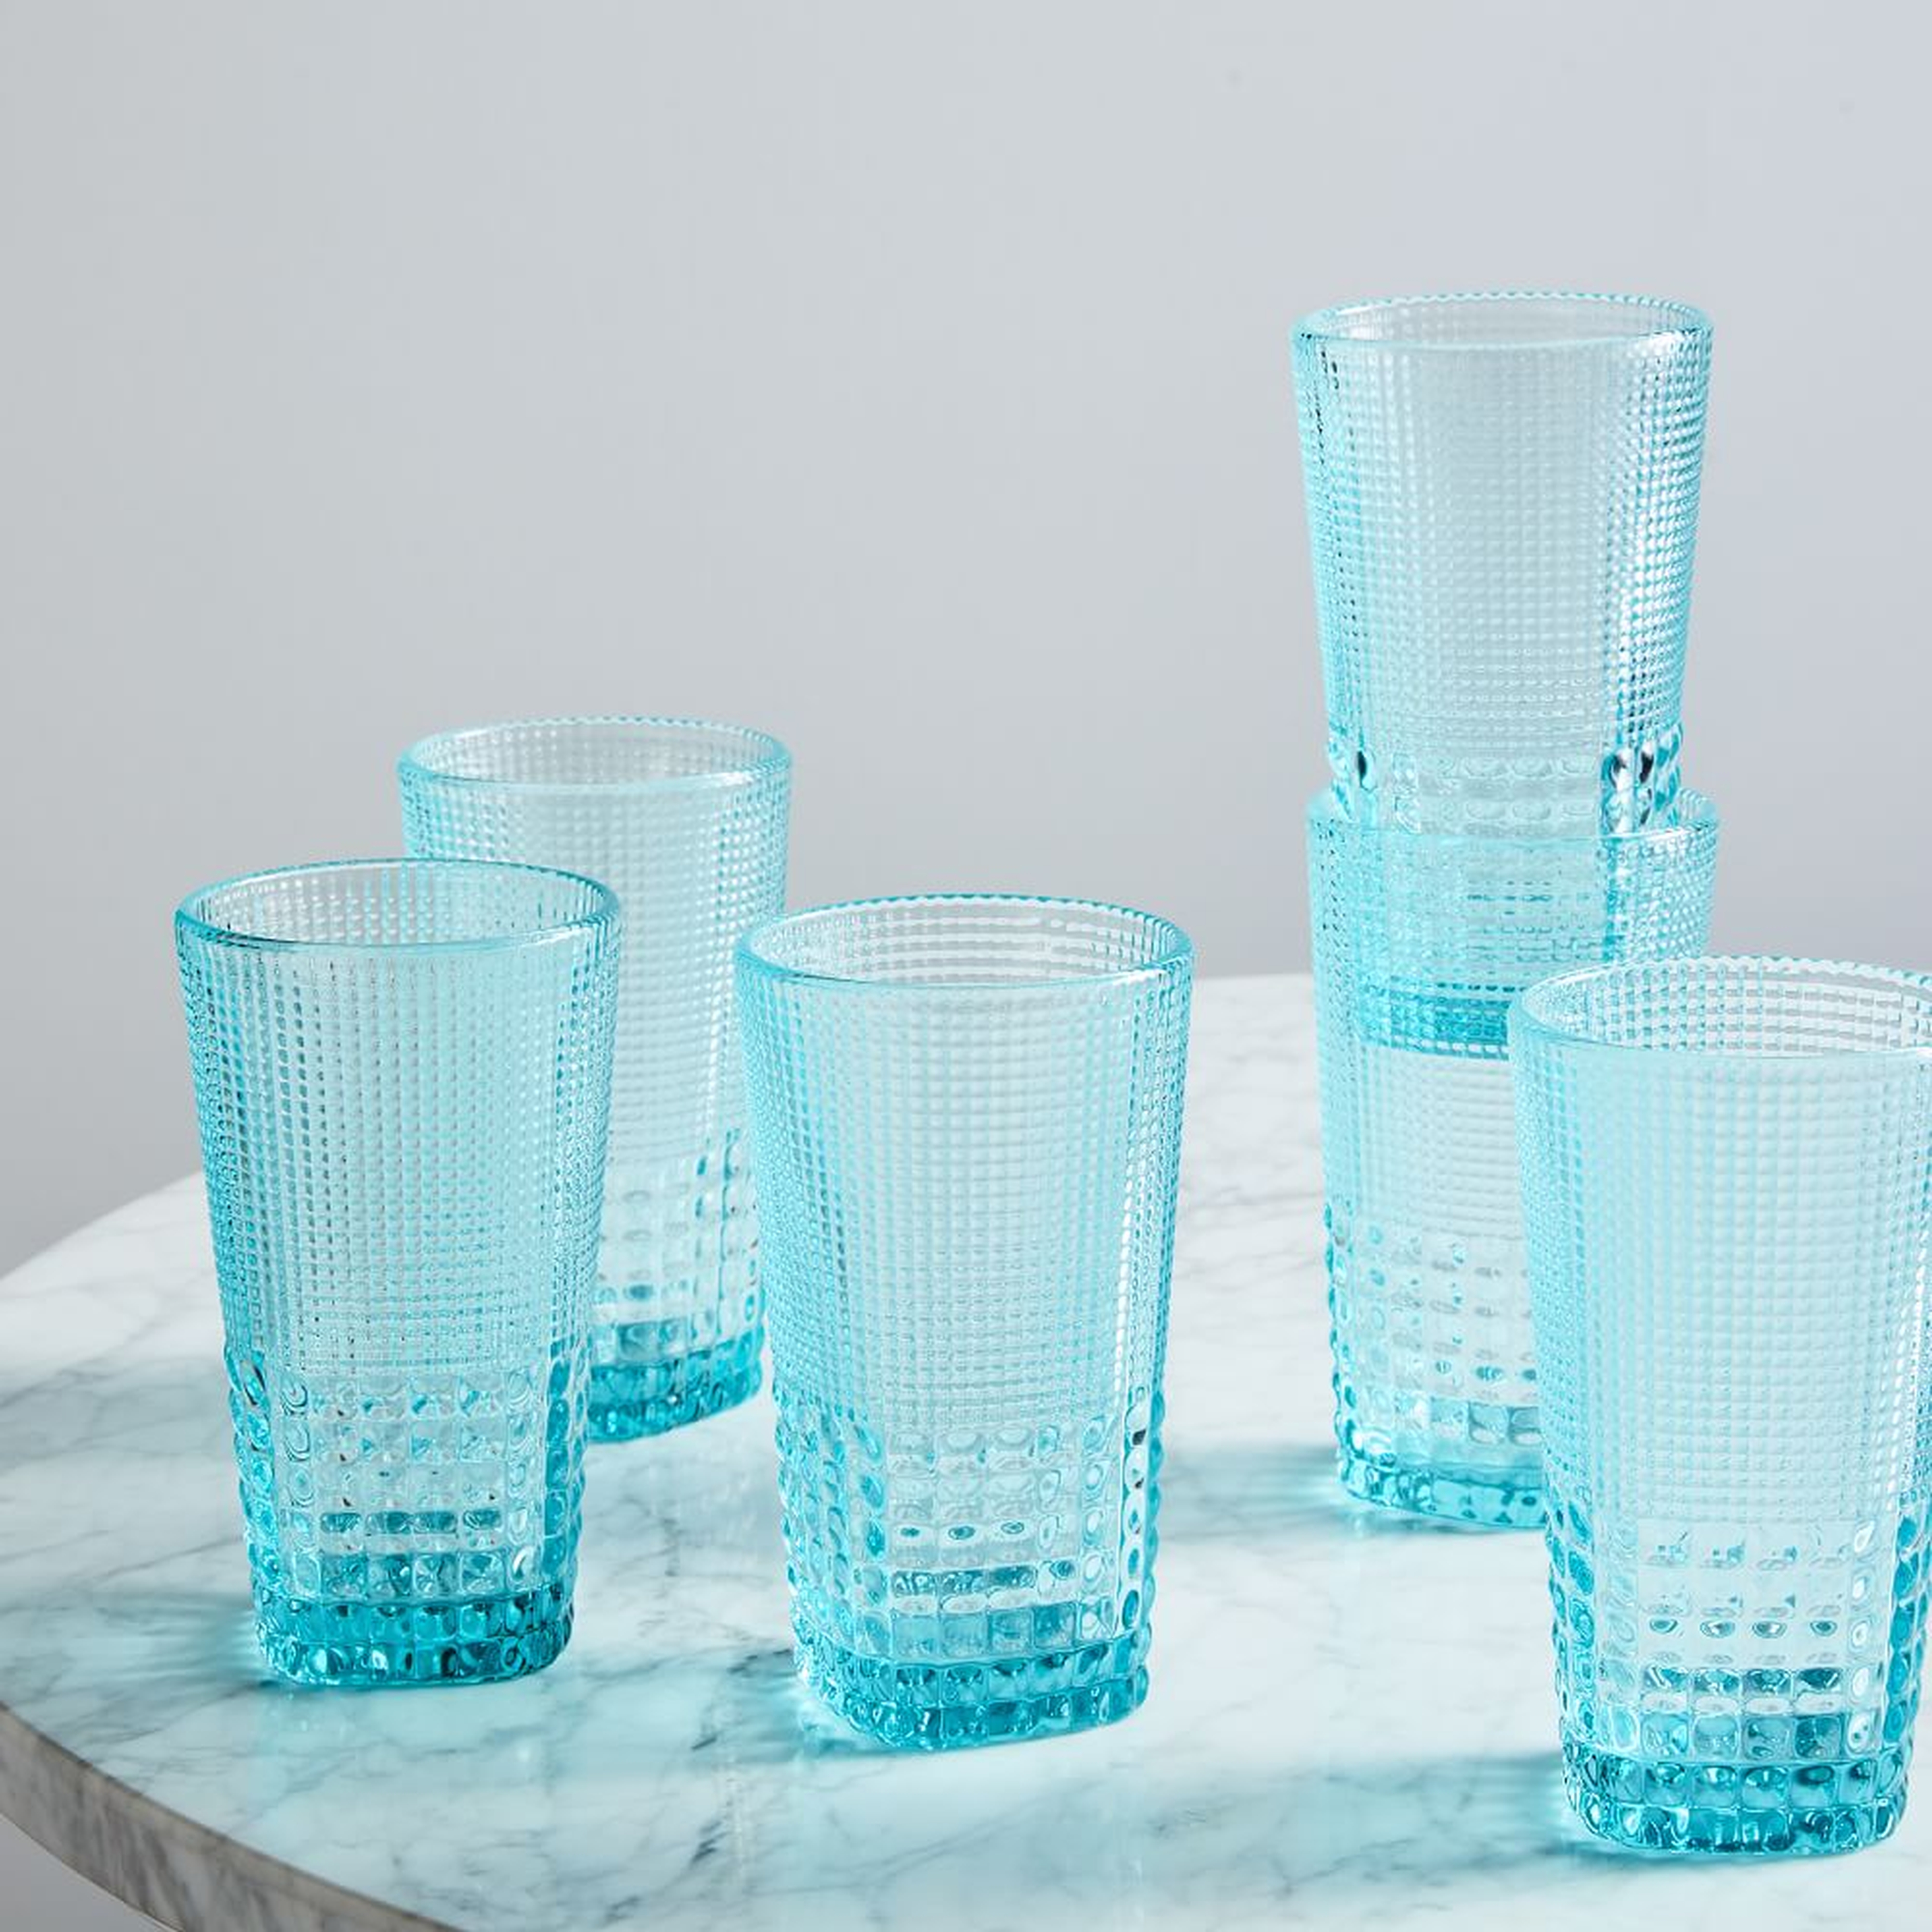 Malcolm Drinking Glass, Tall, Pool blue, 11.5 oz, Set of 6 - West Elm